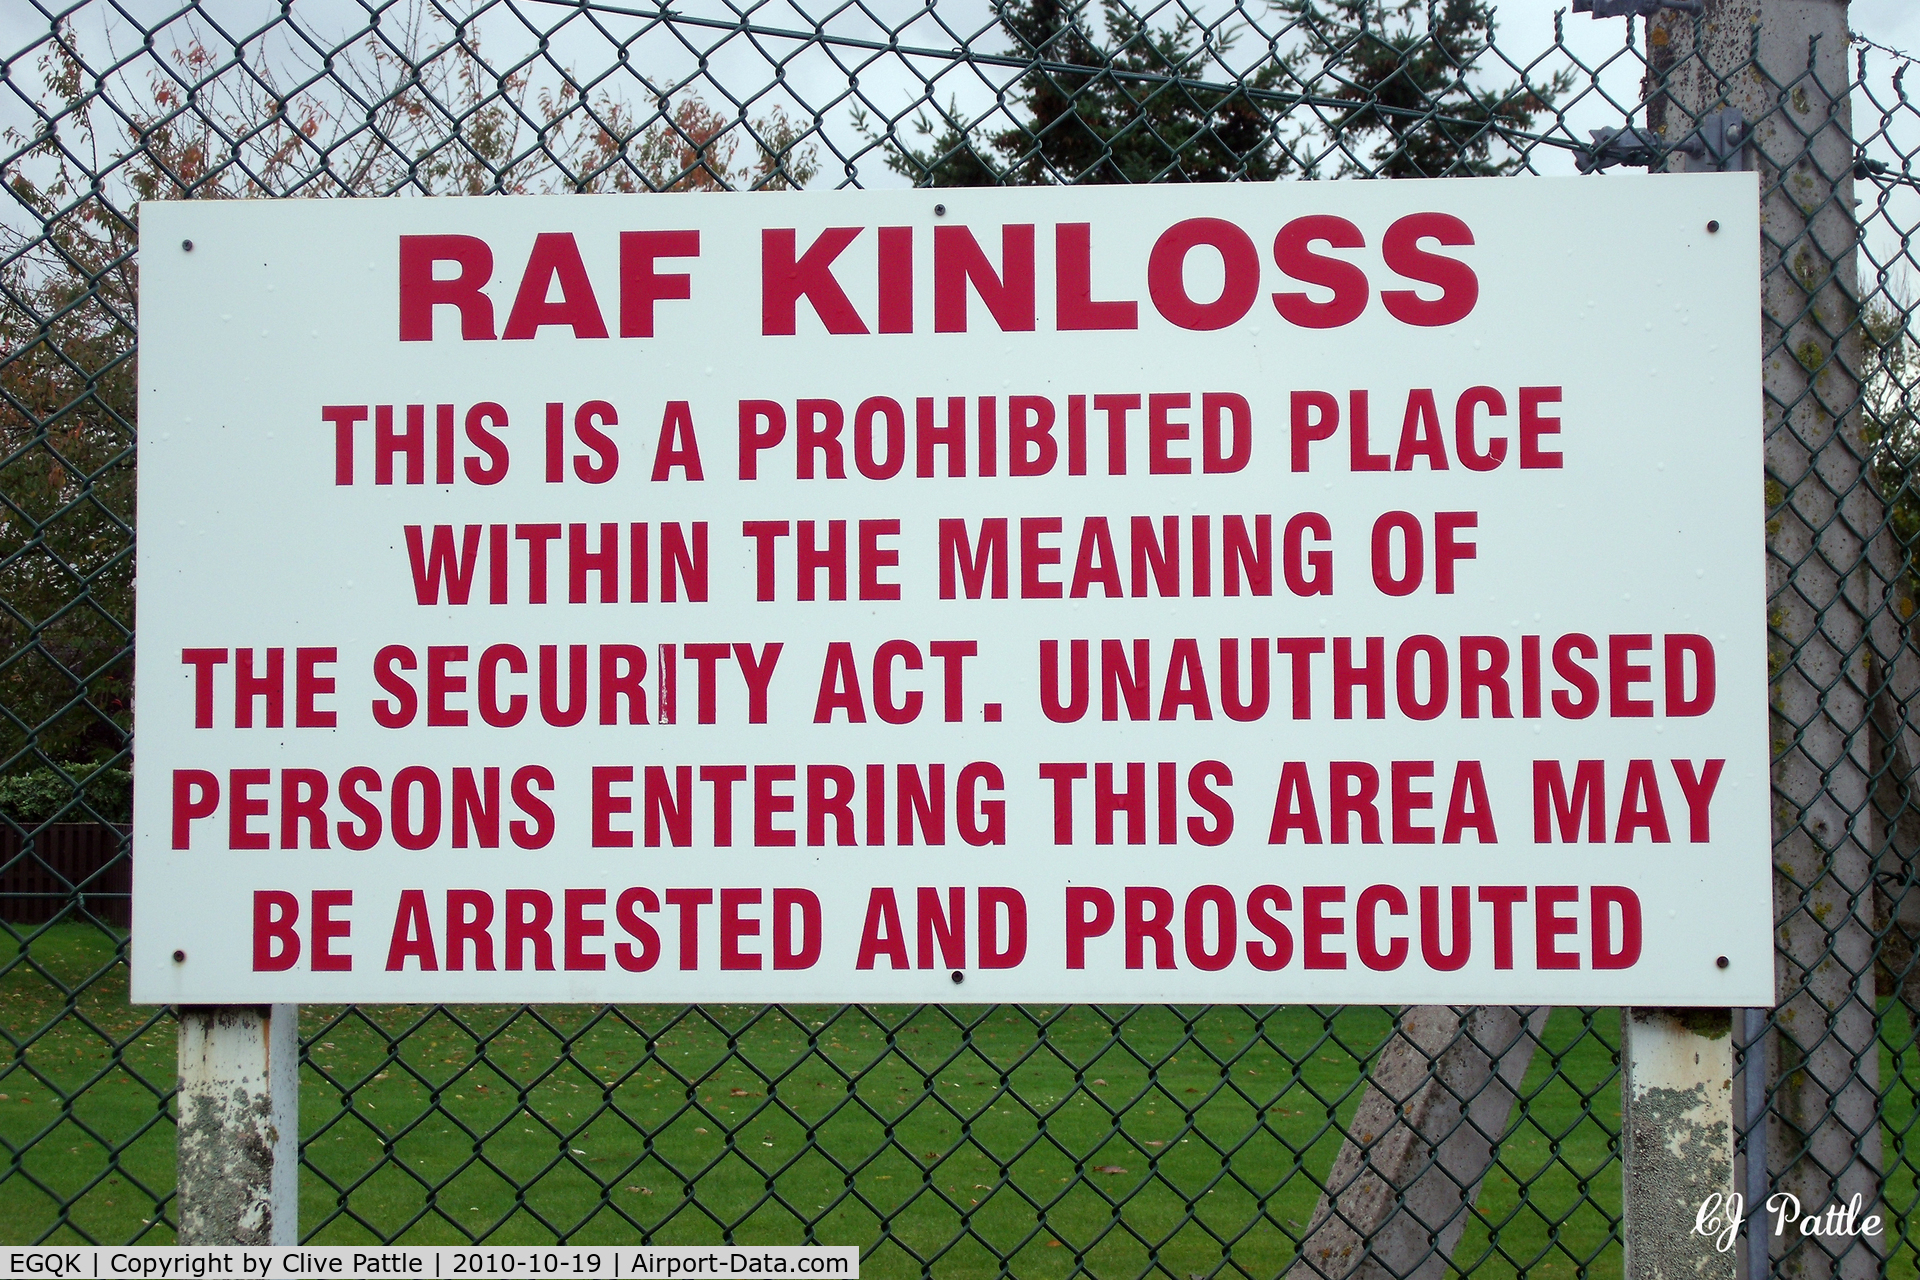 RAF Kinloss Airport, Kinloss, Scotland United Kingdom (EGQK) - A sign at the RAF base at Kinloss. The base was closed as an active airfield in 2012, demoted to emergency diversion status, gaining a Regiment of Royal Engineers in the process who promptly renamed it Kinloss Barracks.